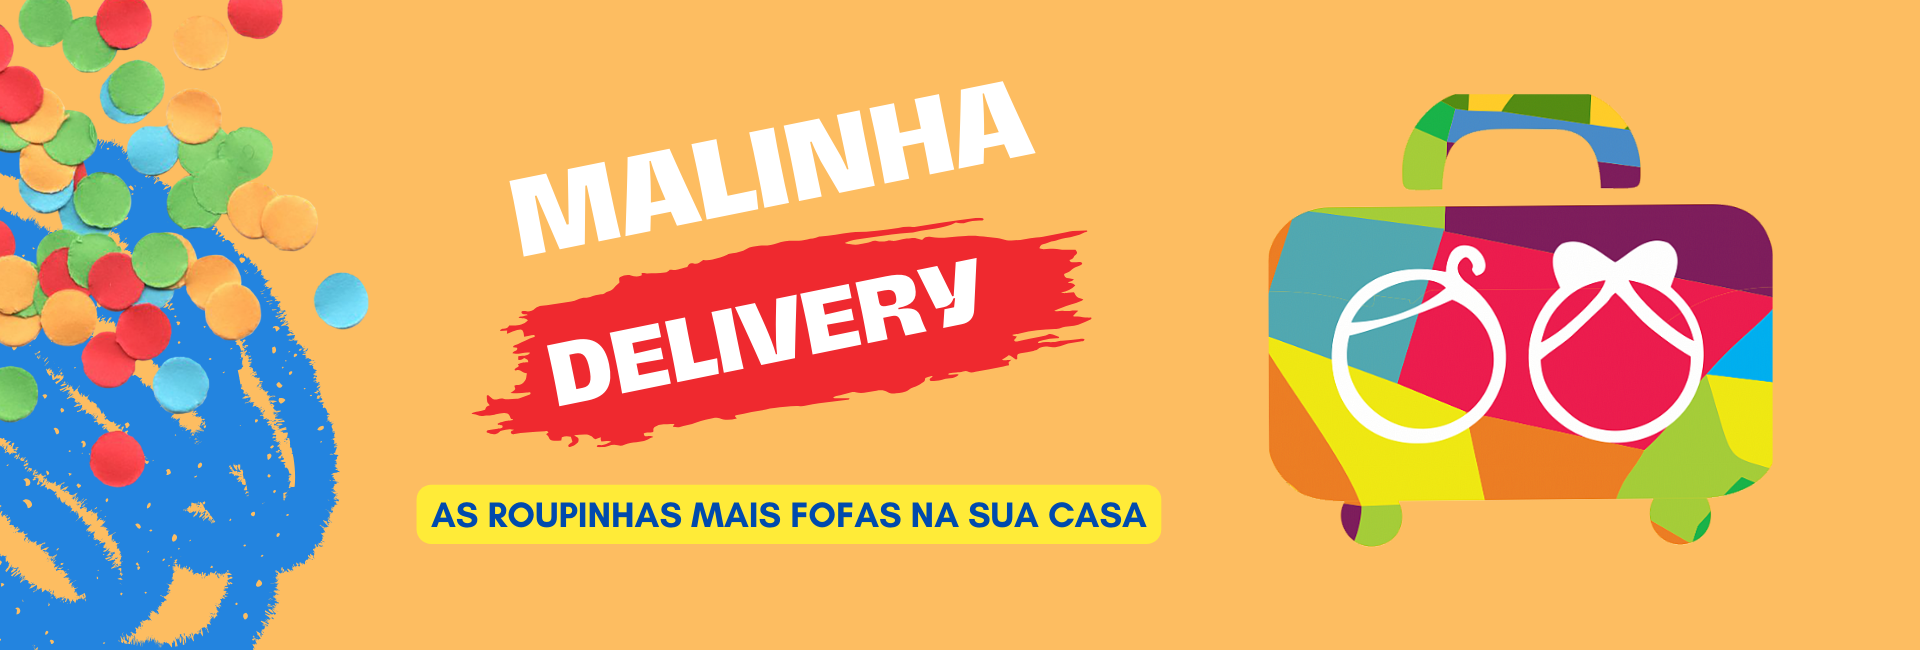 Malinha Delivery